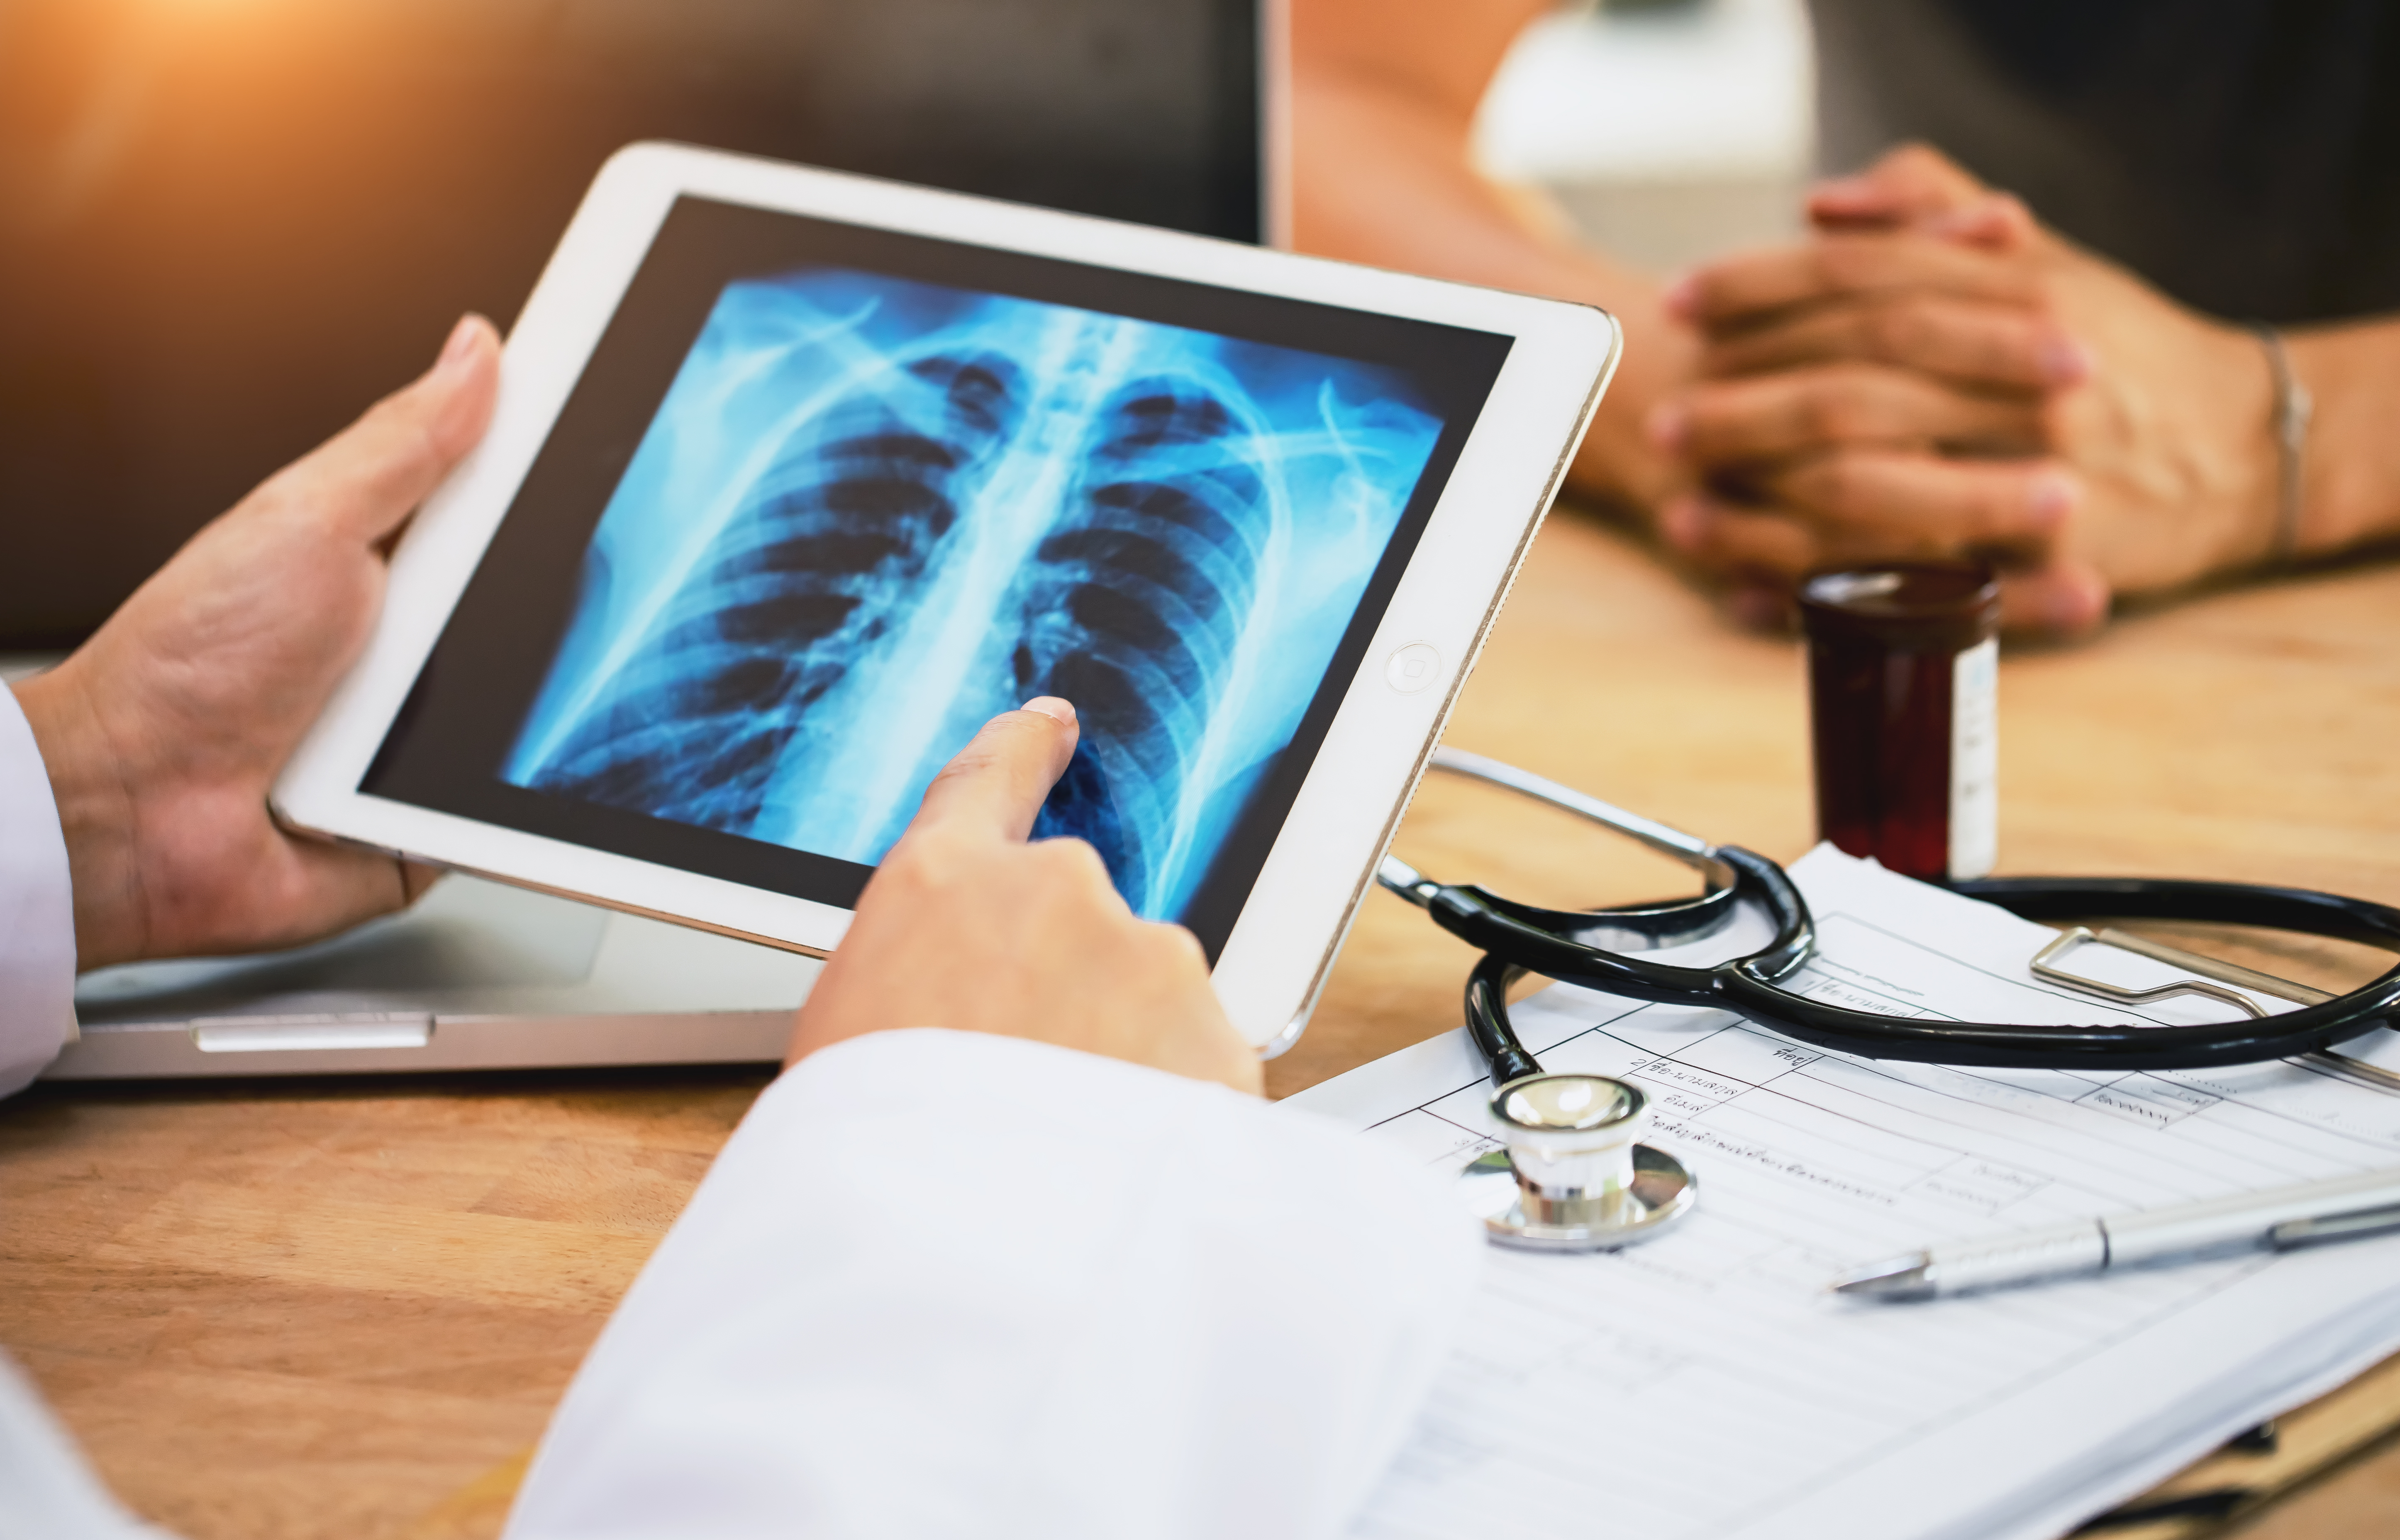 Low-dose CT screenings offer early lung cancer detection